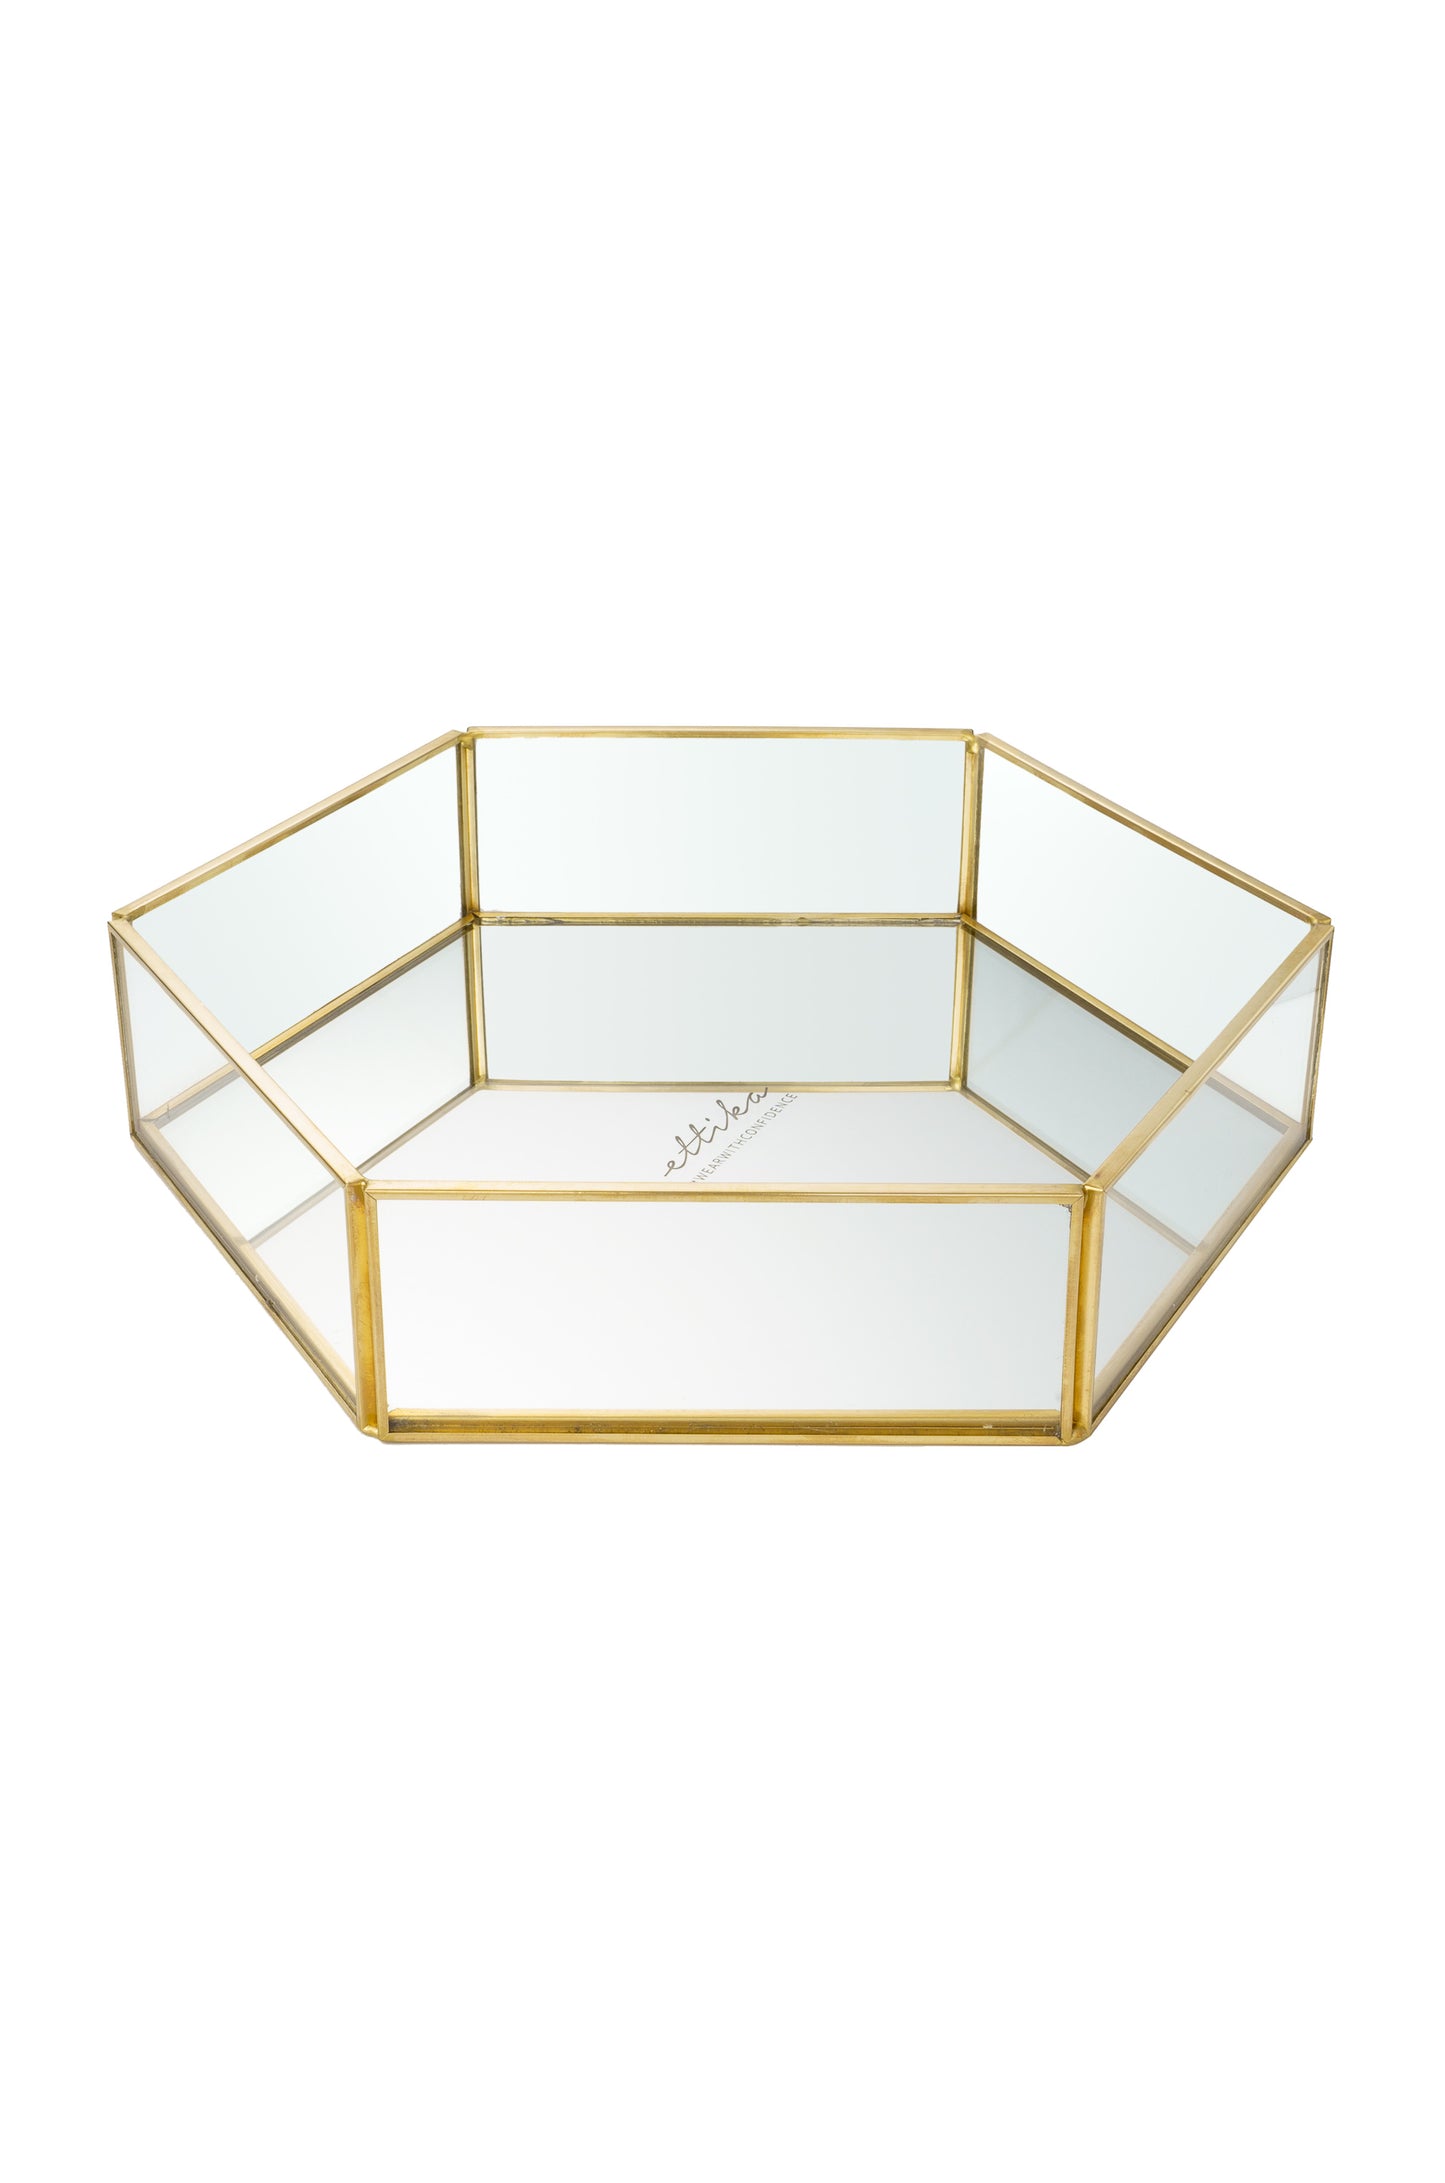 Large Mirror Bottom Jewelry and Display Tray on white background  